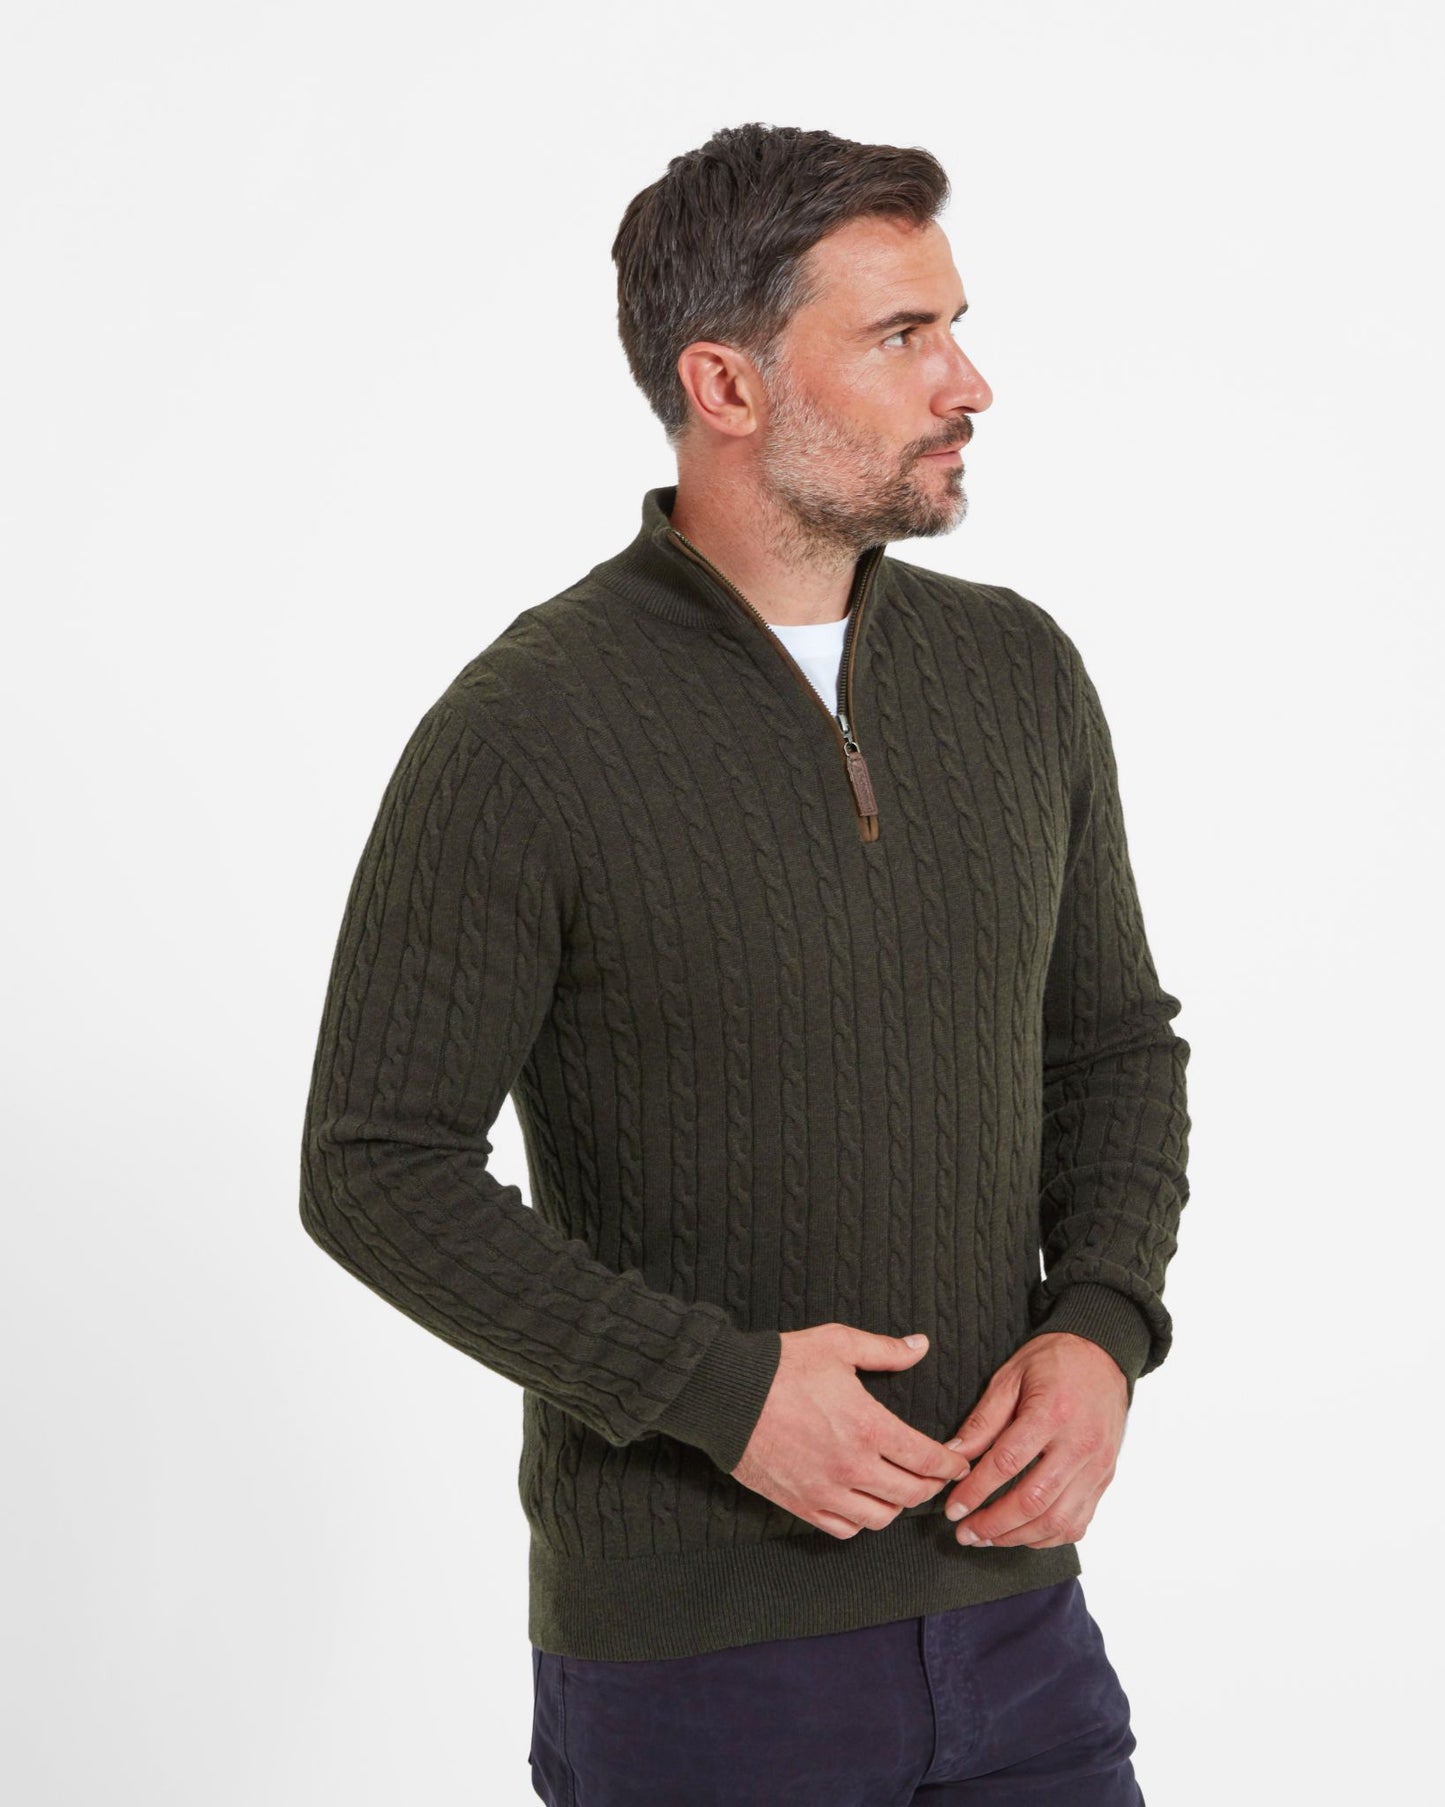 Cotton Cashmere Cable 1/4 Zip Jumper - Loden Green